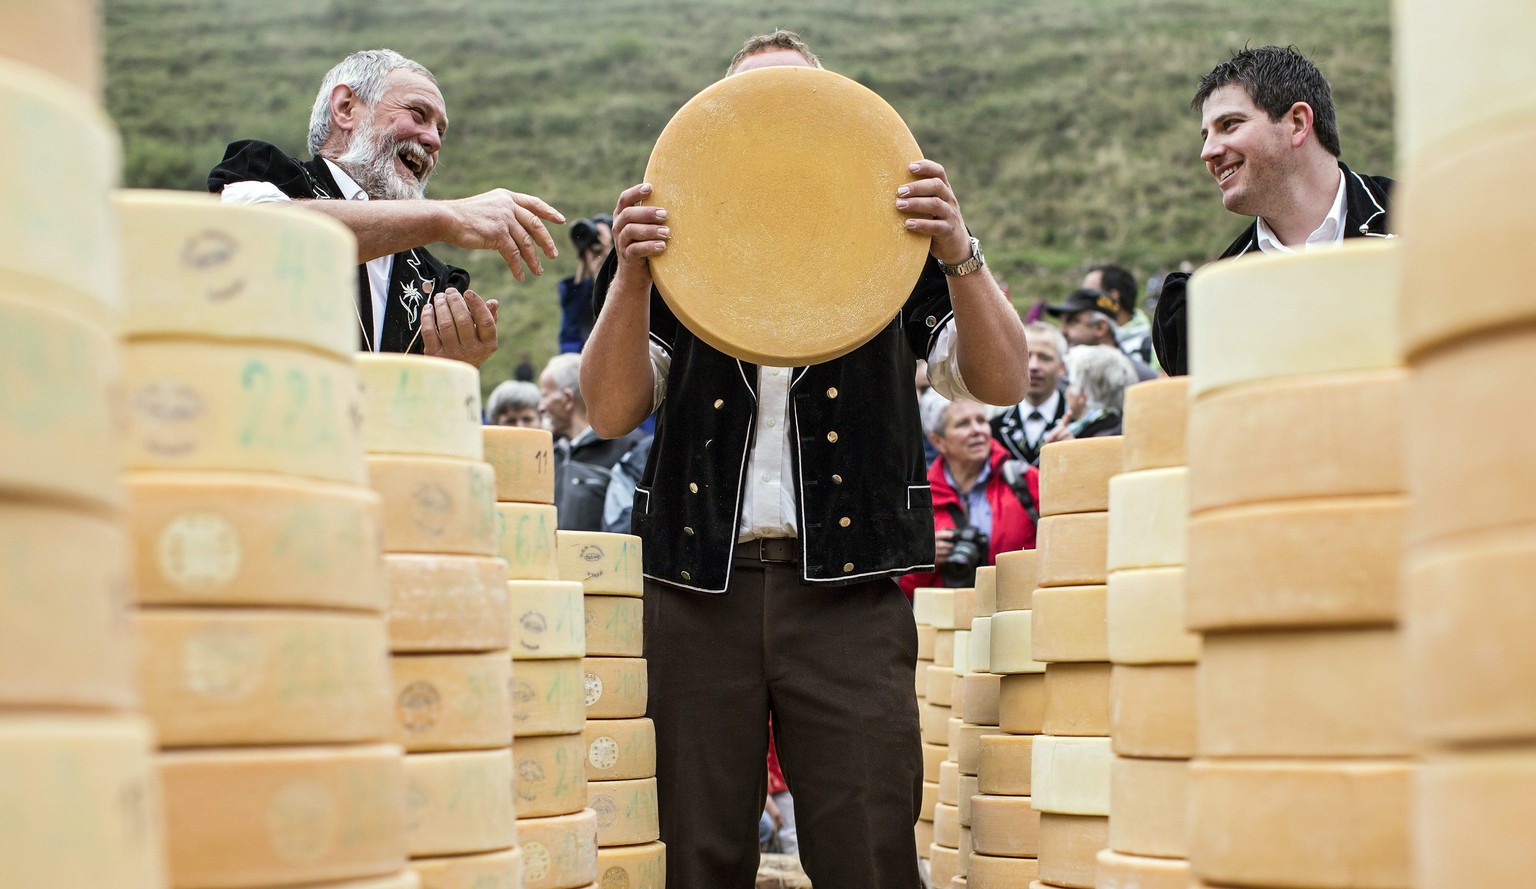 epa04936862 epa04936860 Dairy farmers attend traditional Chaesteilet (lit.: sharing the cheese) in Justistal, Switzerland, 18 September 2015. The local farmers whose cows have spend the summer on the  ...